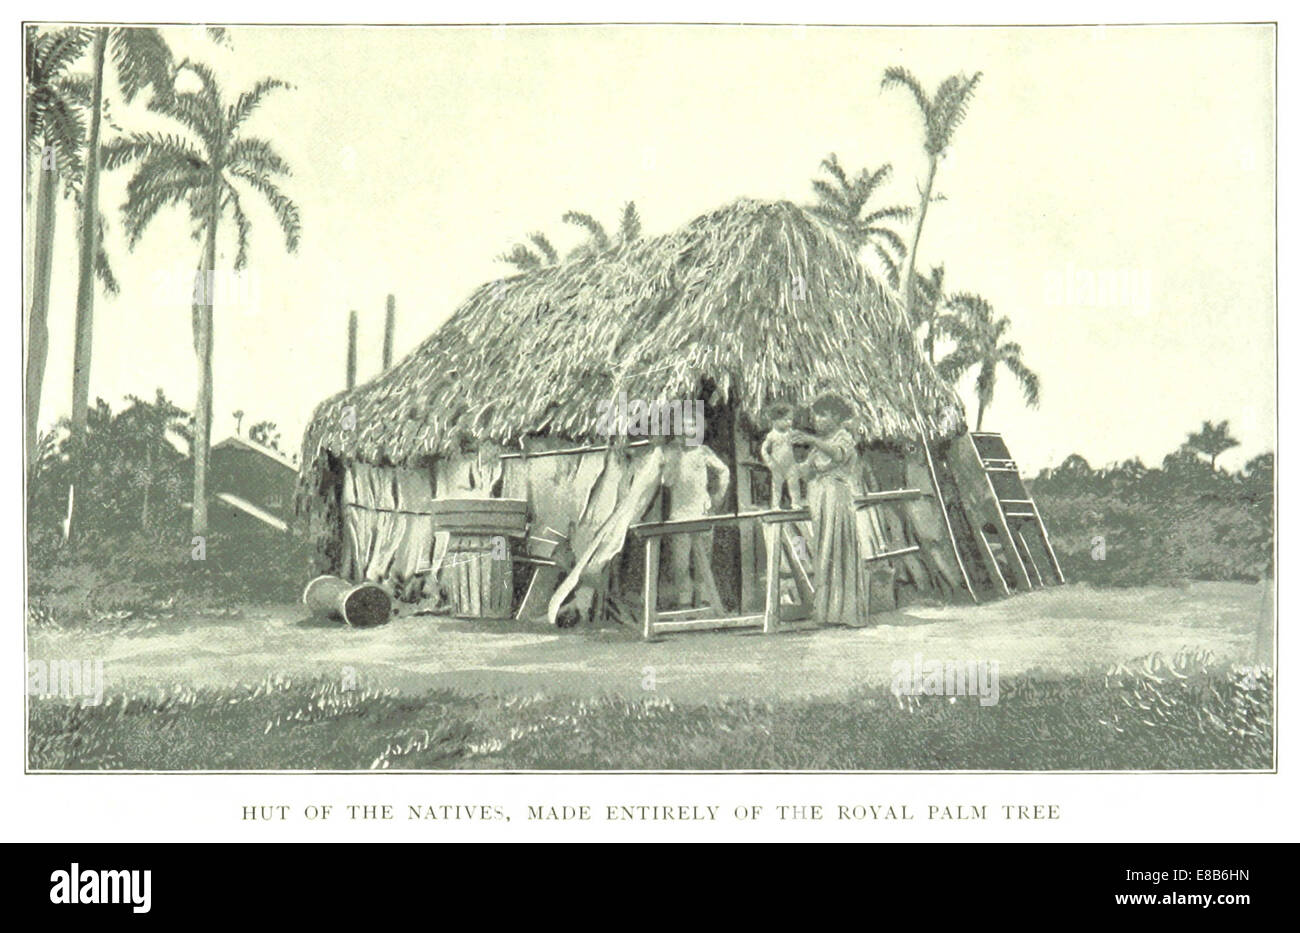 CLARK(1899) Cuba p075 - HUT OF THE NATIVES, MADE ENTIRELY OF THE ROYAL PALM TREE Stock Photo